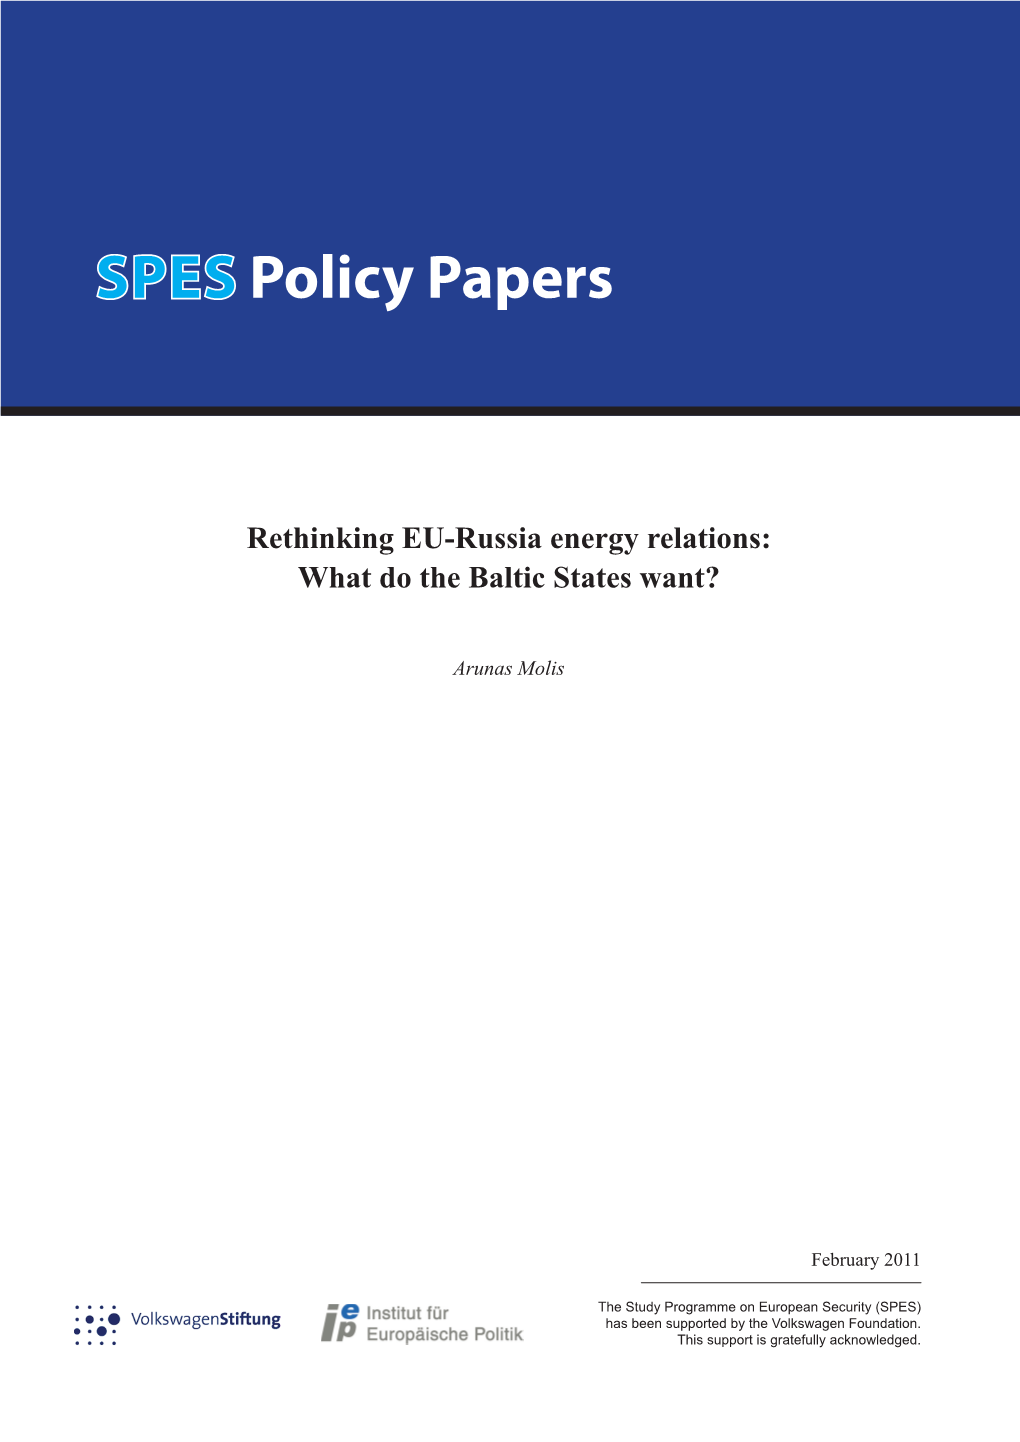 Rethinking EU-Russia Energy Relations: What Do the Baltic States Want?